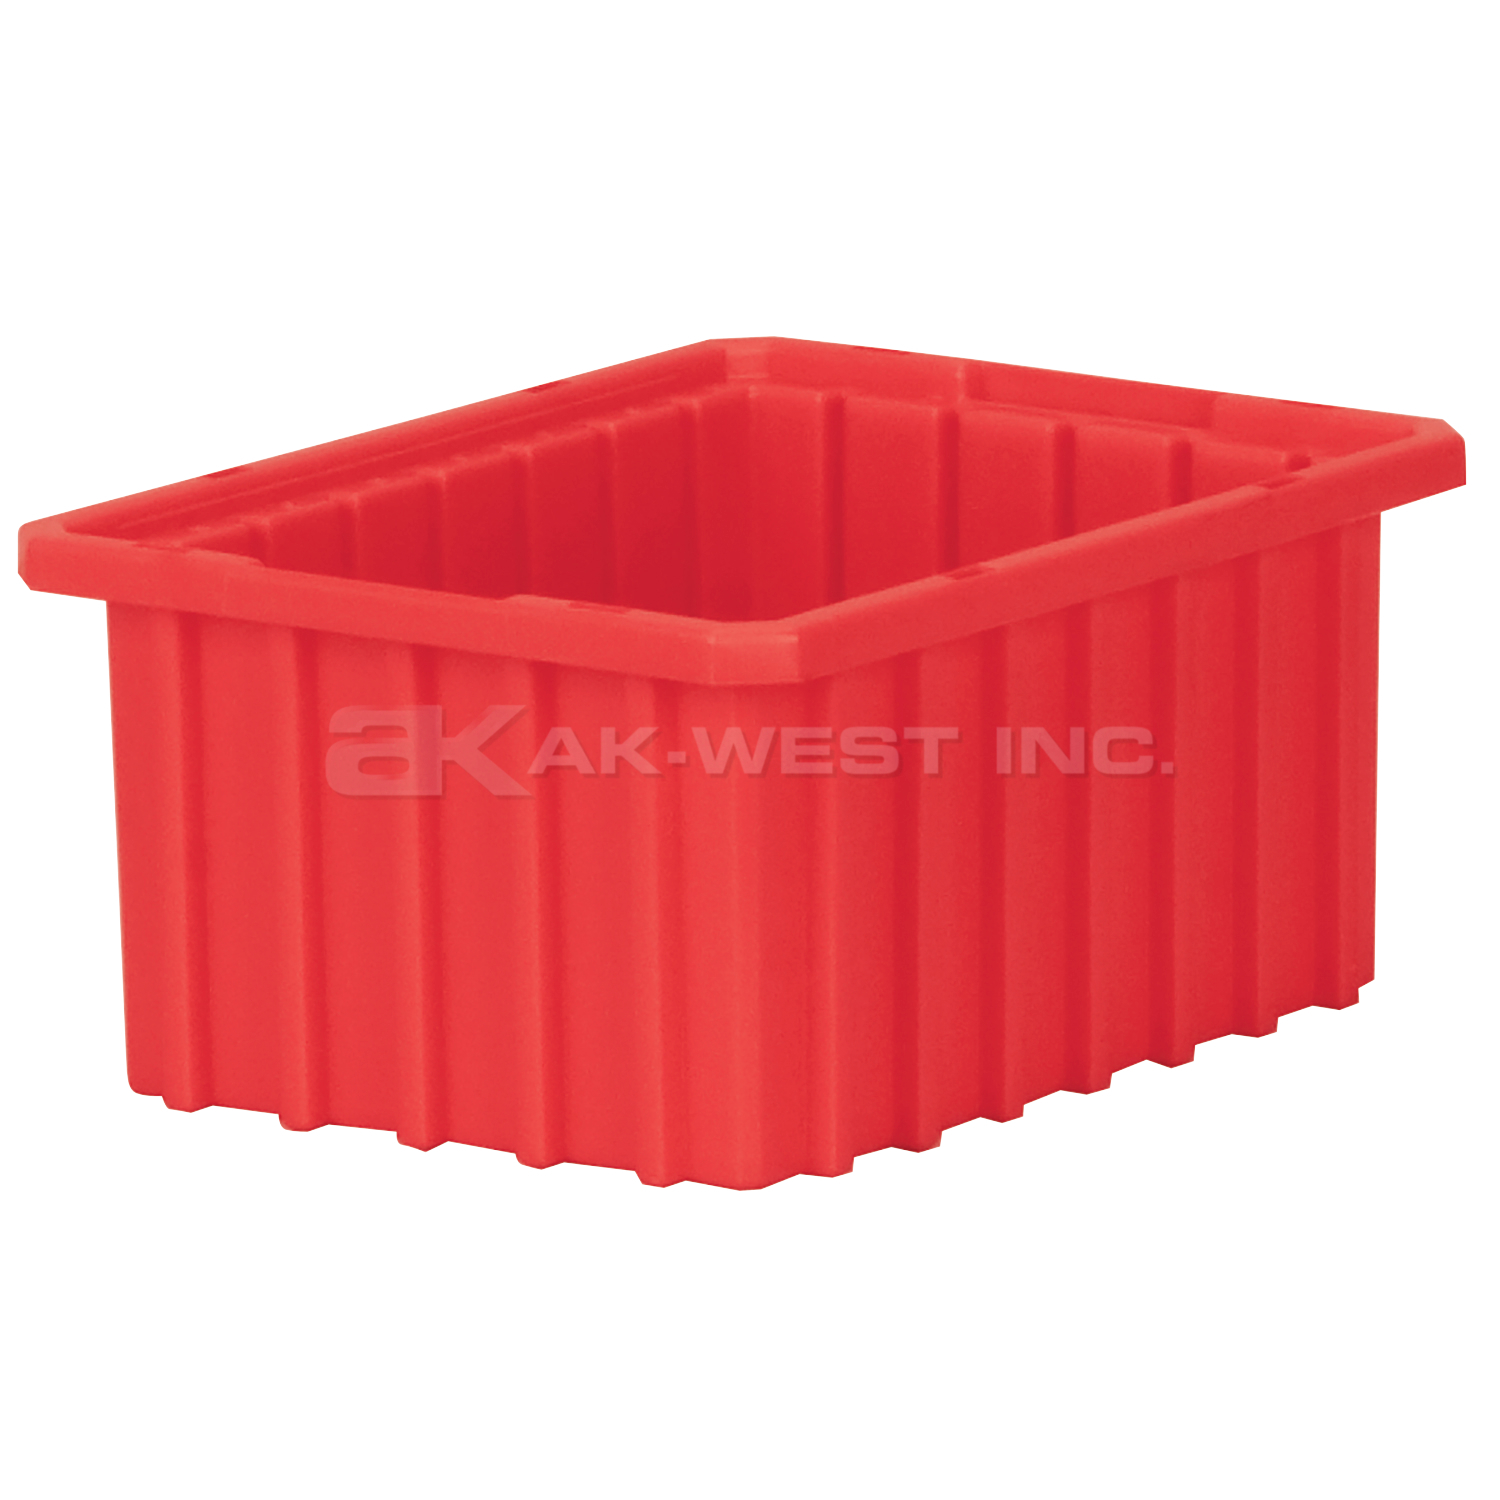 Red, 10-7/8" x 8-1/4" x 5" Dividable Grid Container (20 Per Carton)